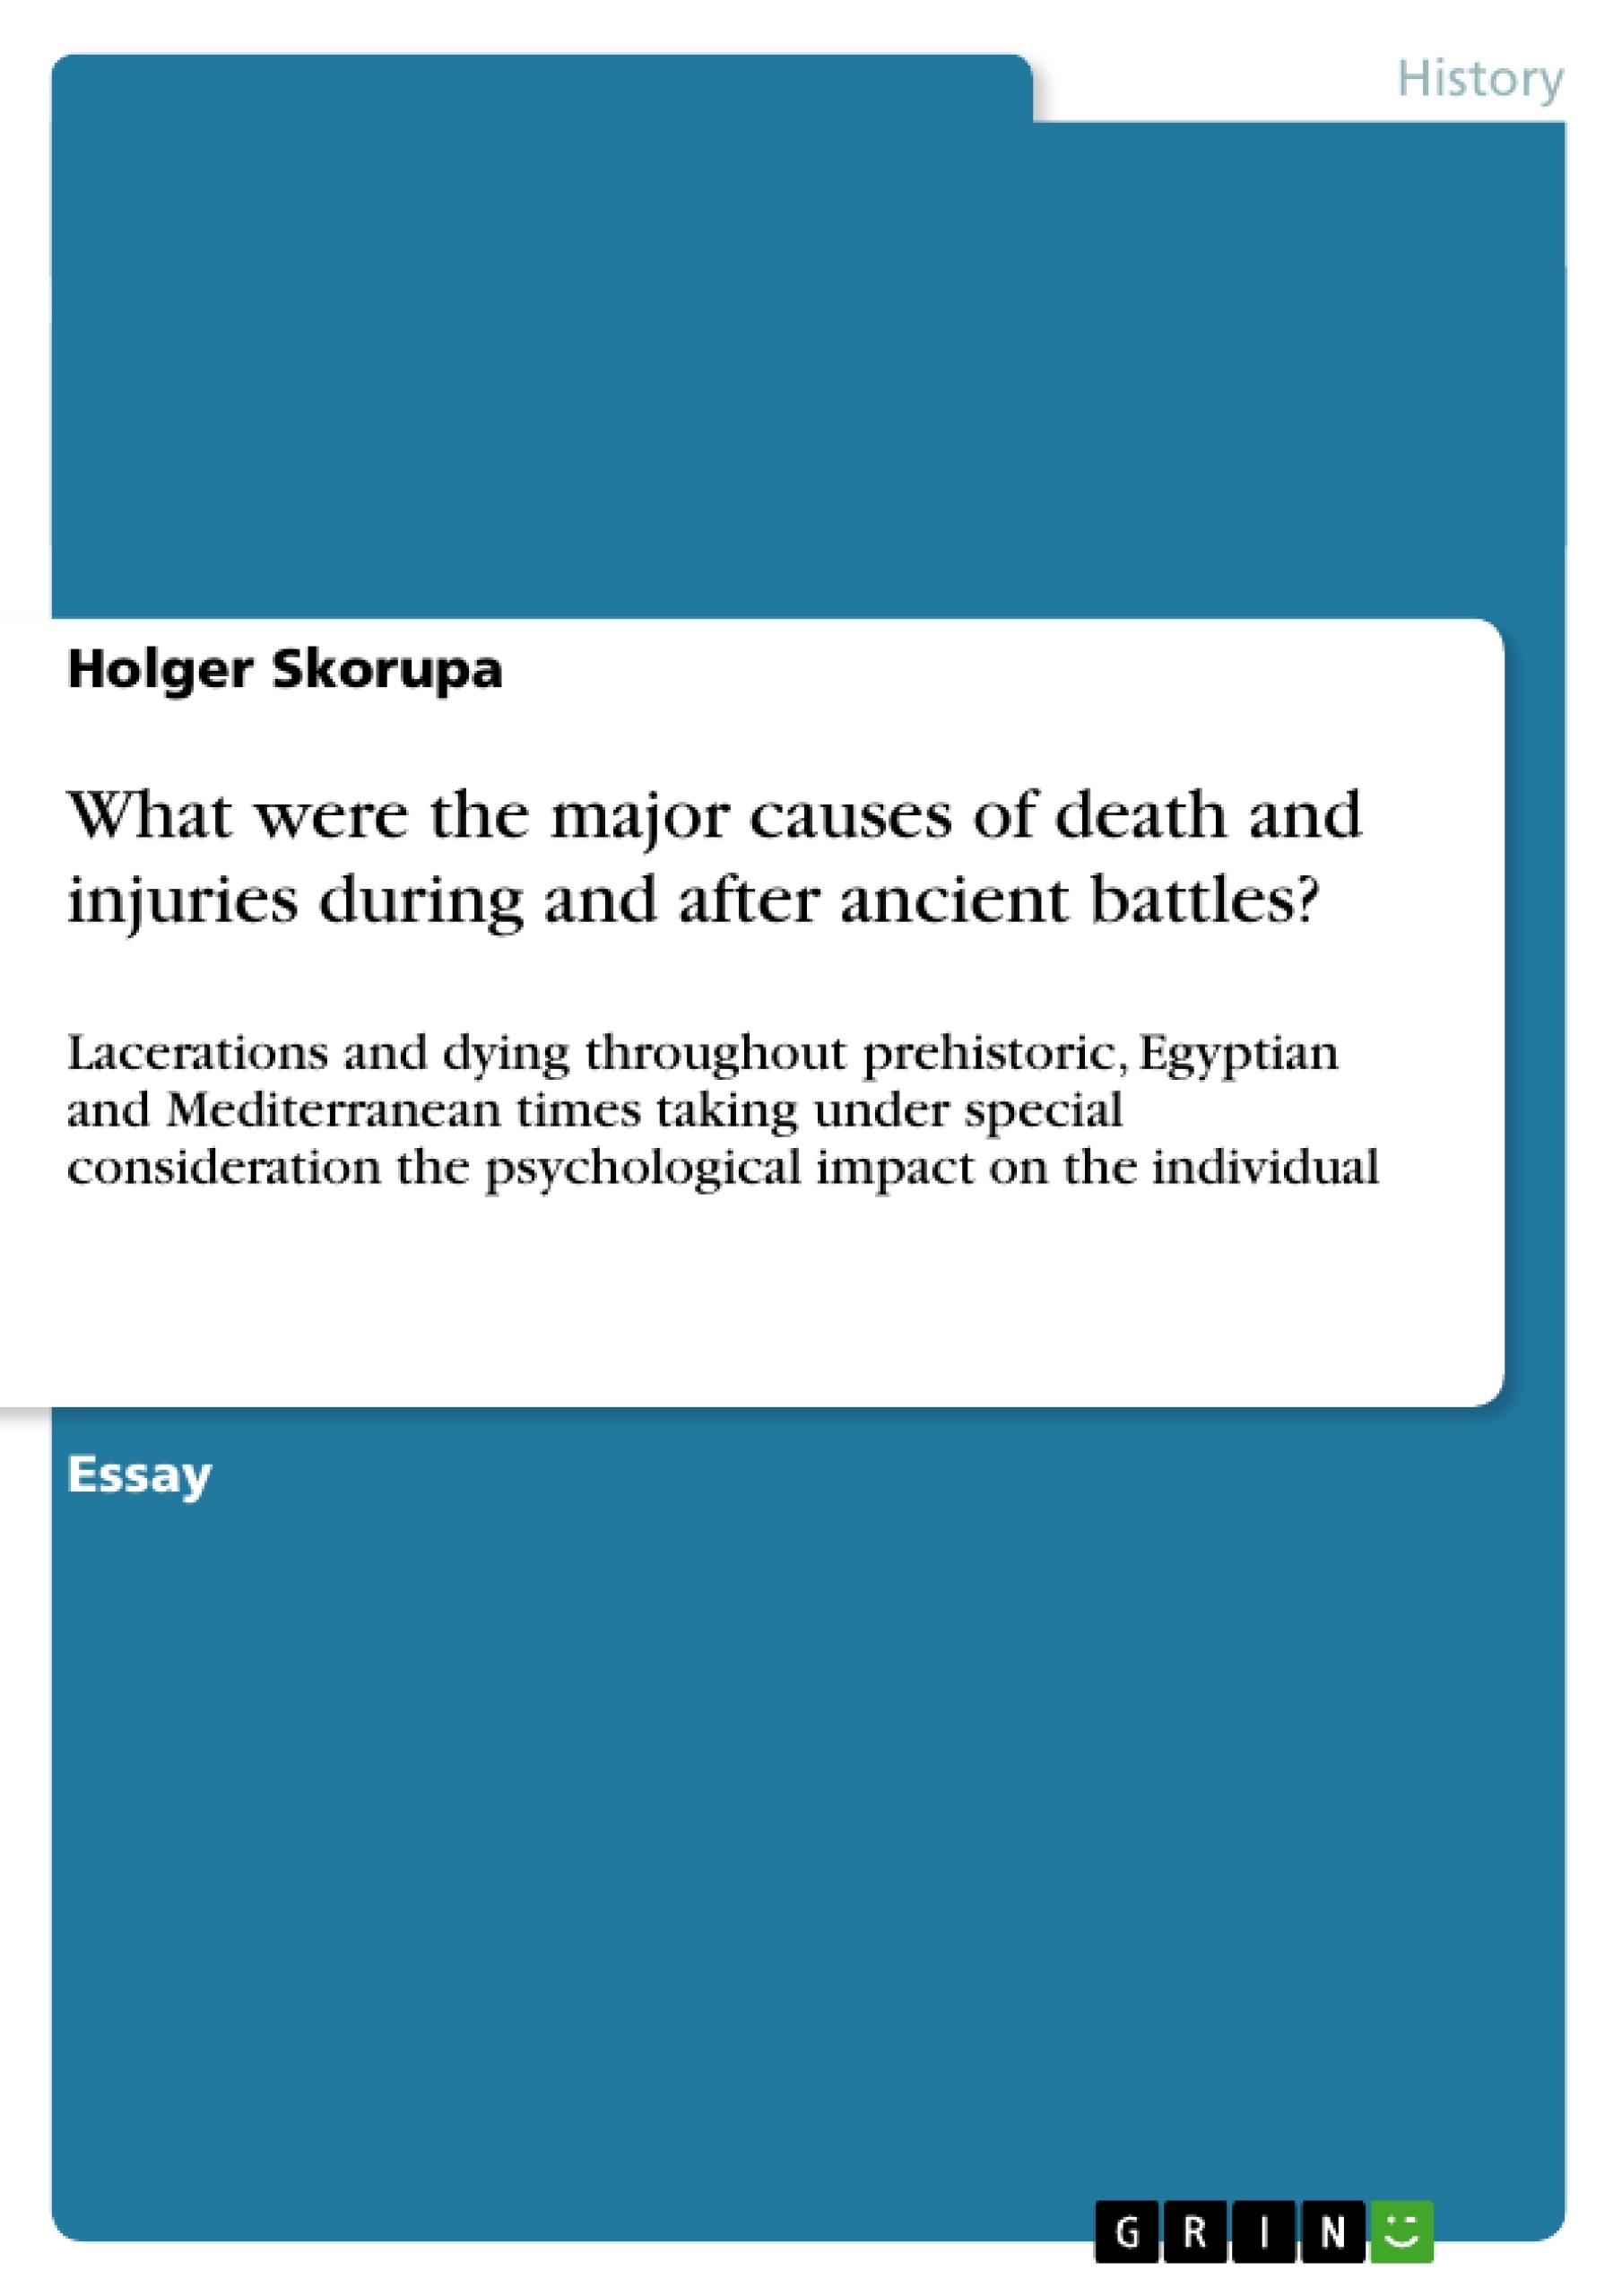 Título: What were the major causes of death and injuries during and after ancient battles?